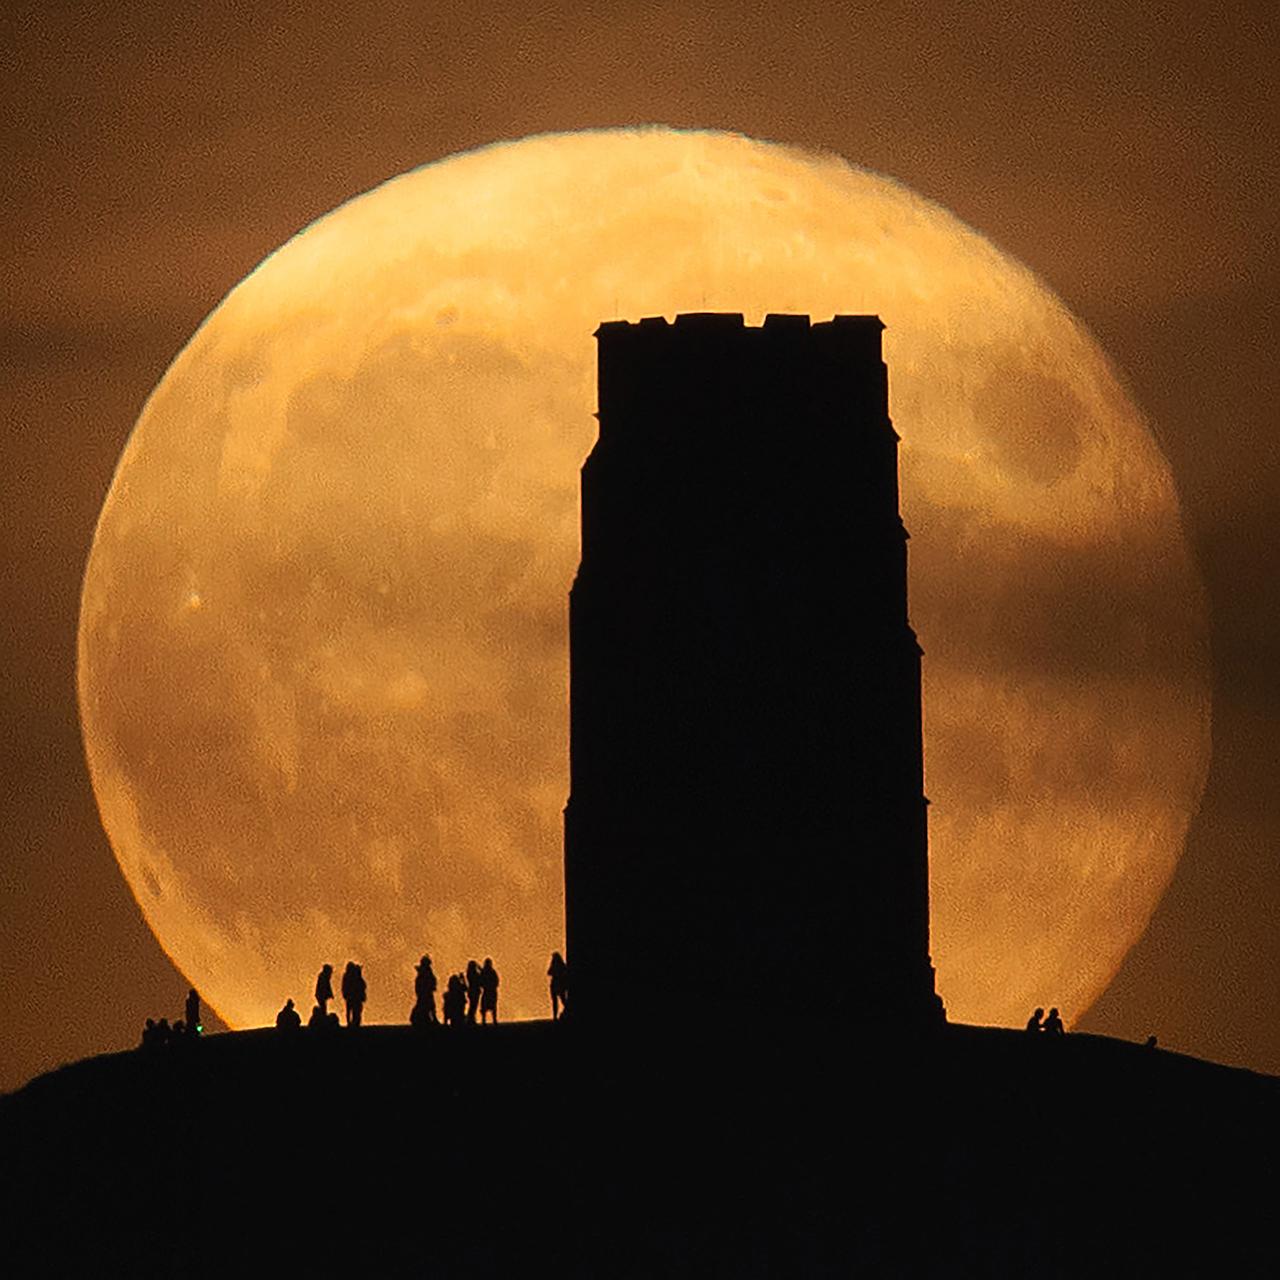 Image of Glastonbury Tor's shadow with moon double the size in the background